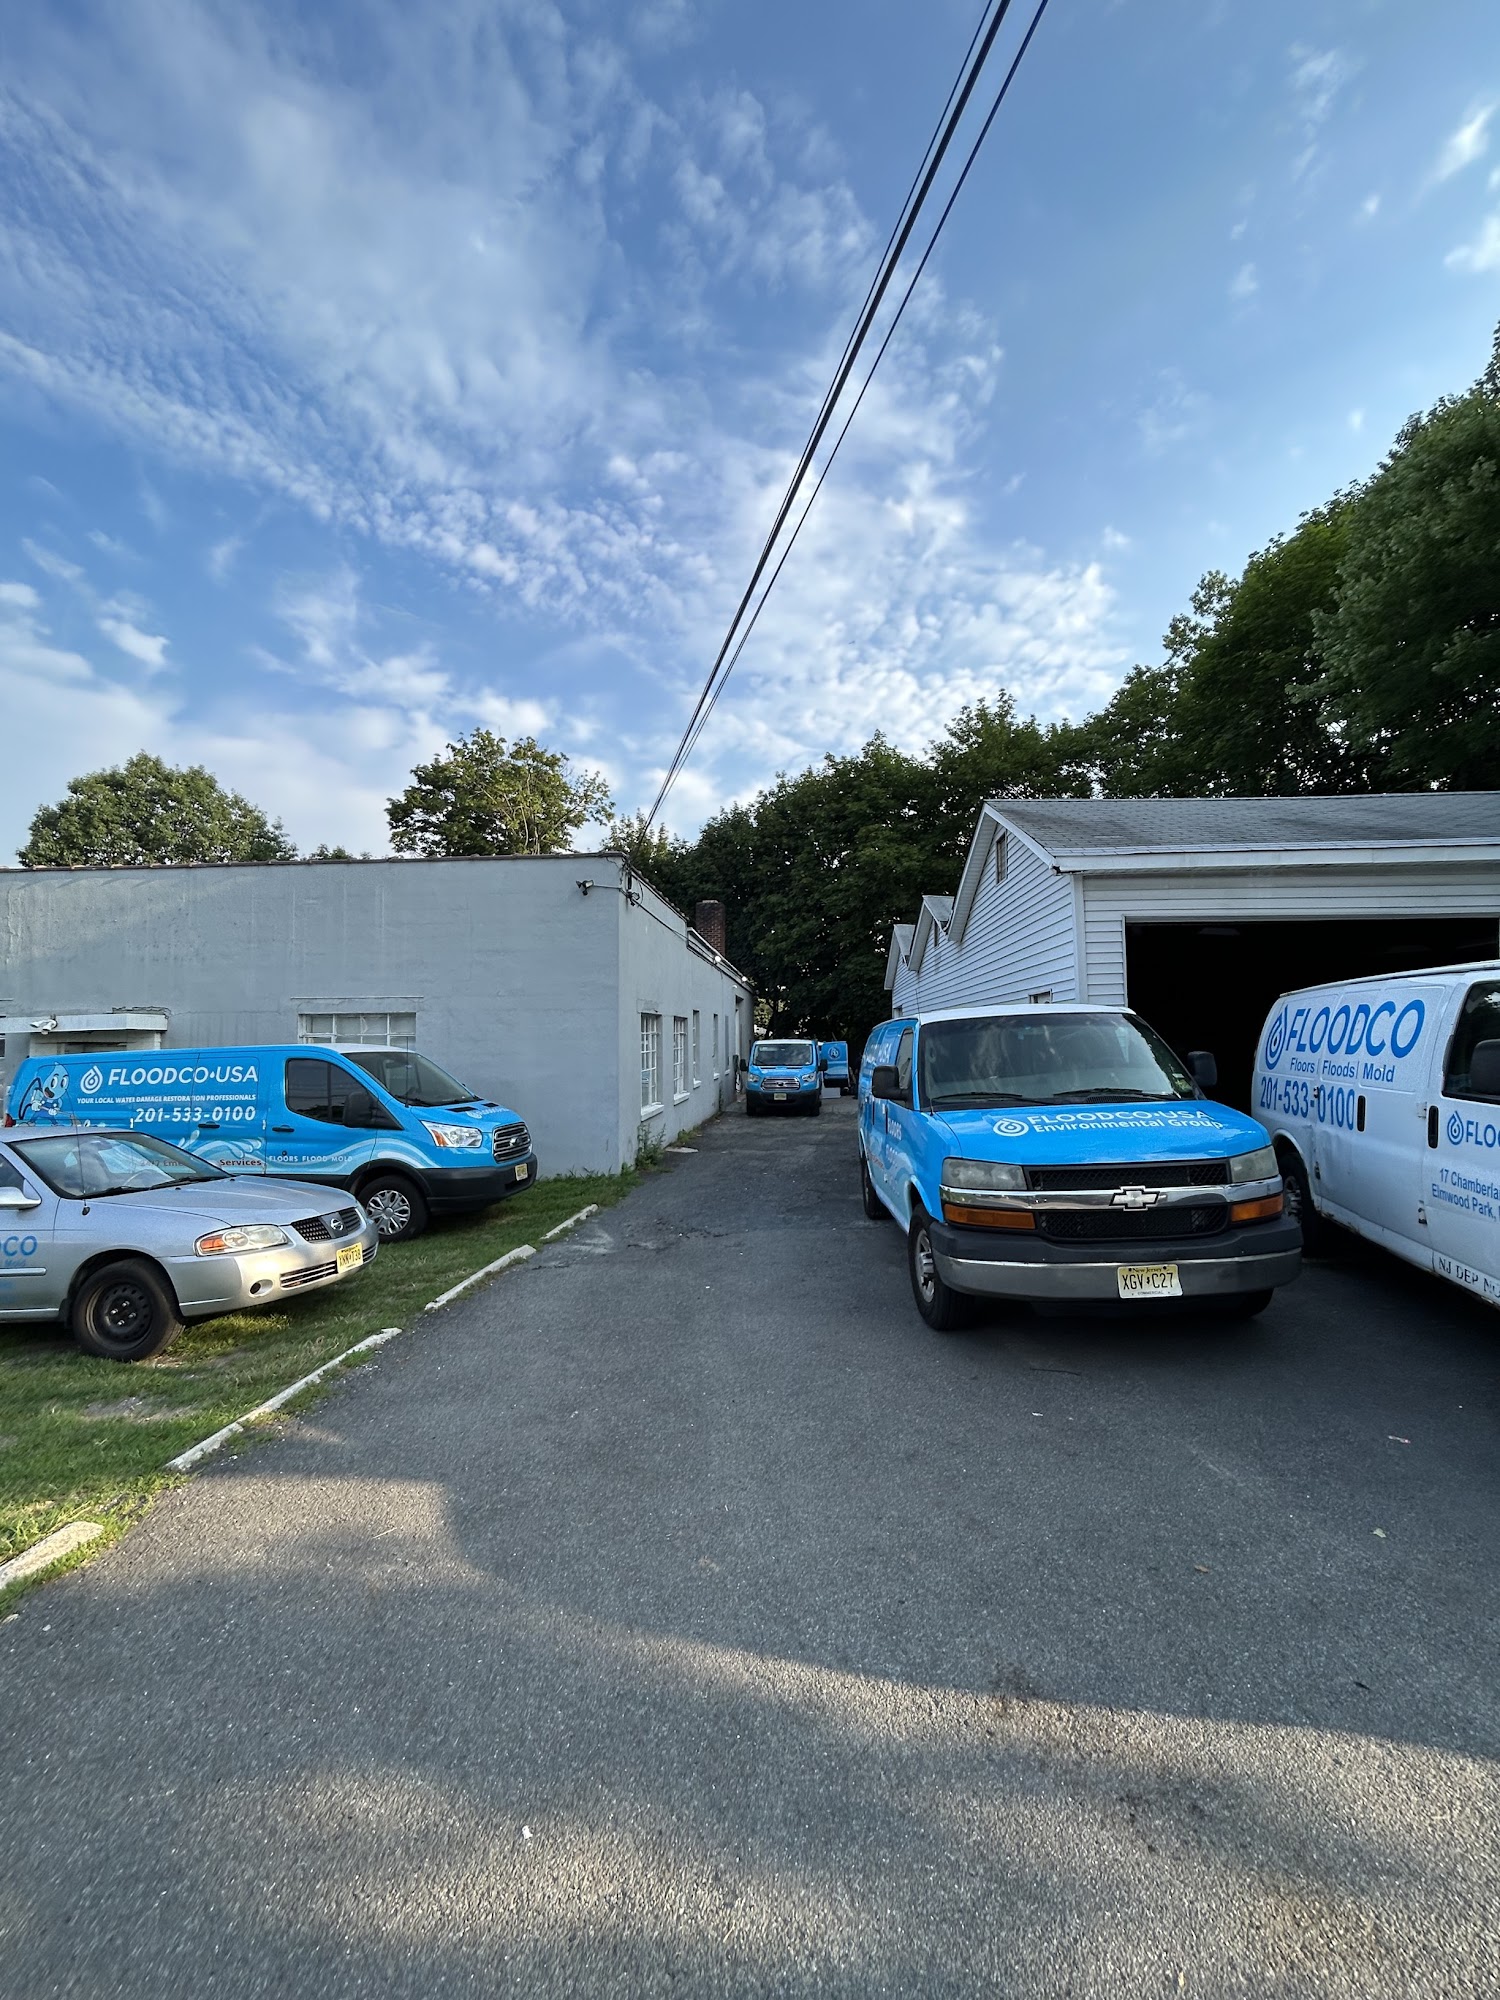 FloodCo USA - Water Damage Restoration, Mold Removal and Mold Testing, & Cleaning Services serving in Hoboken and Jersey City